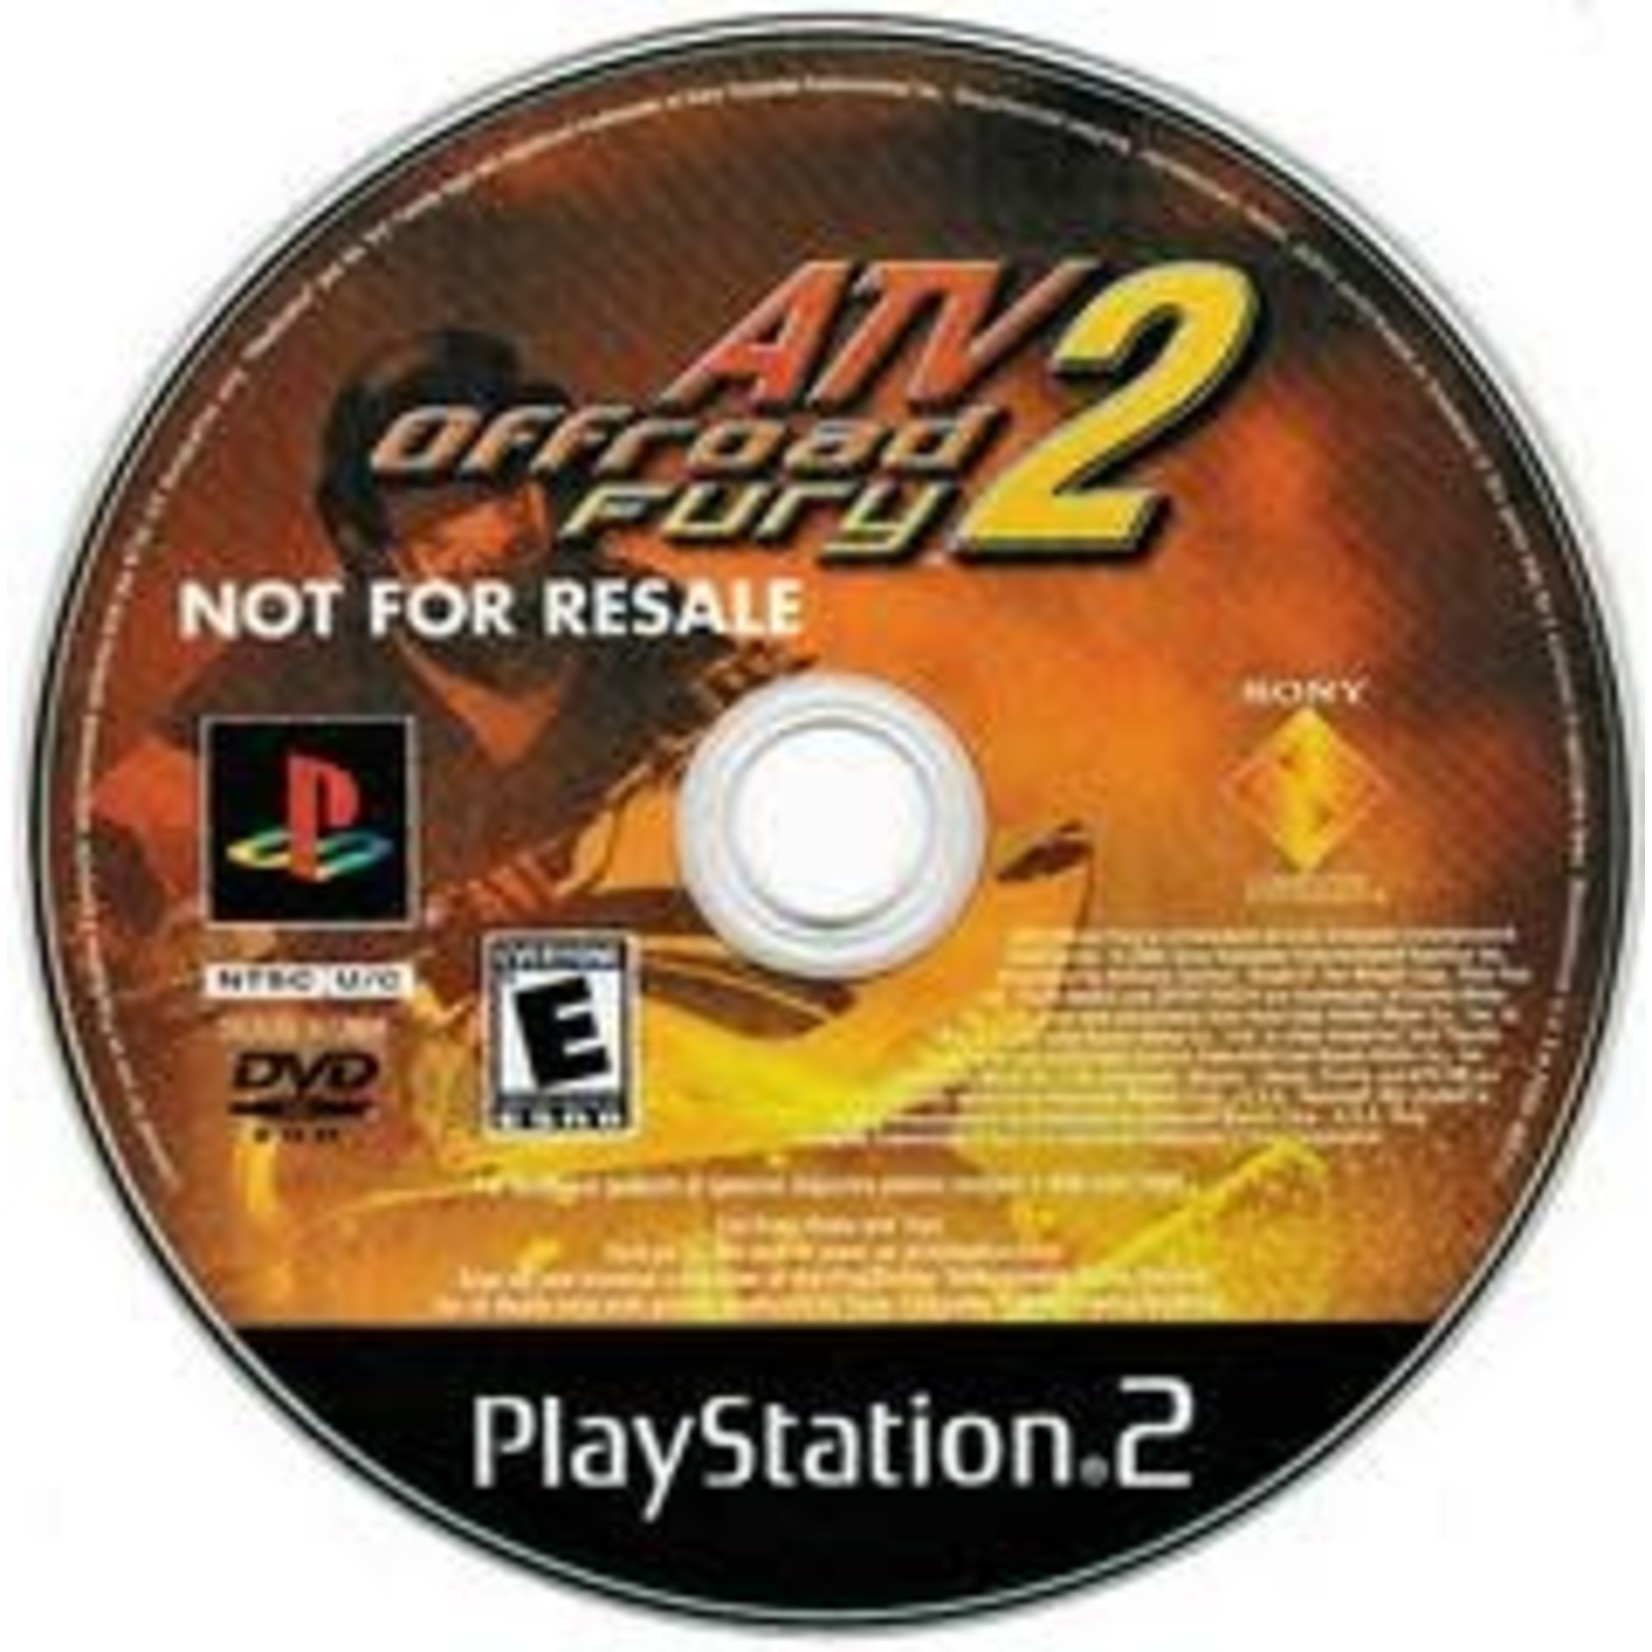 Playstation ATV Offroad Fury 2 [Not for Resale] [Playstation 2]